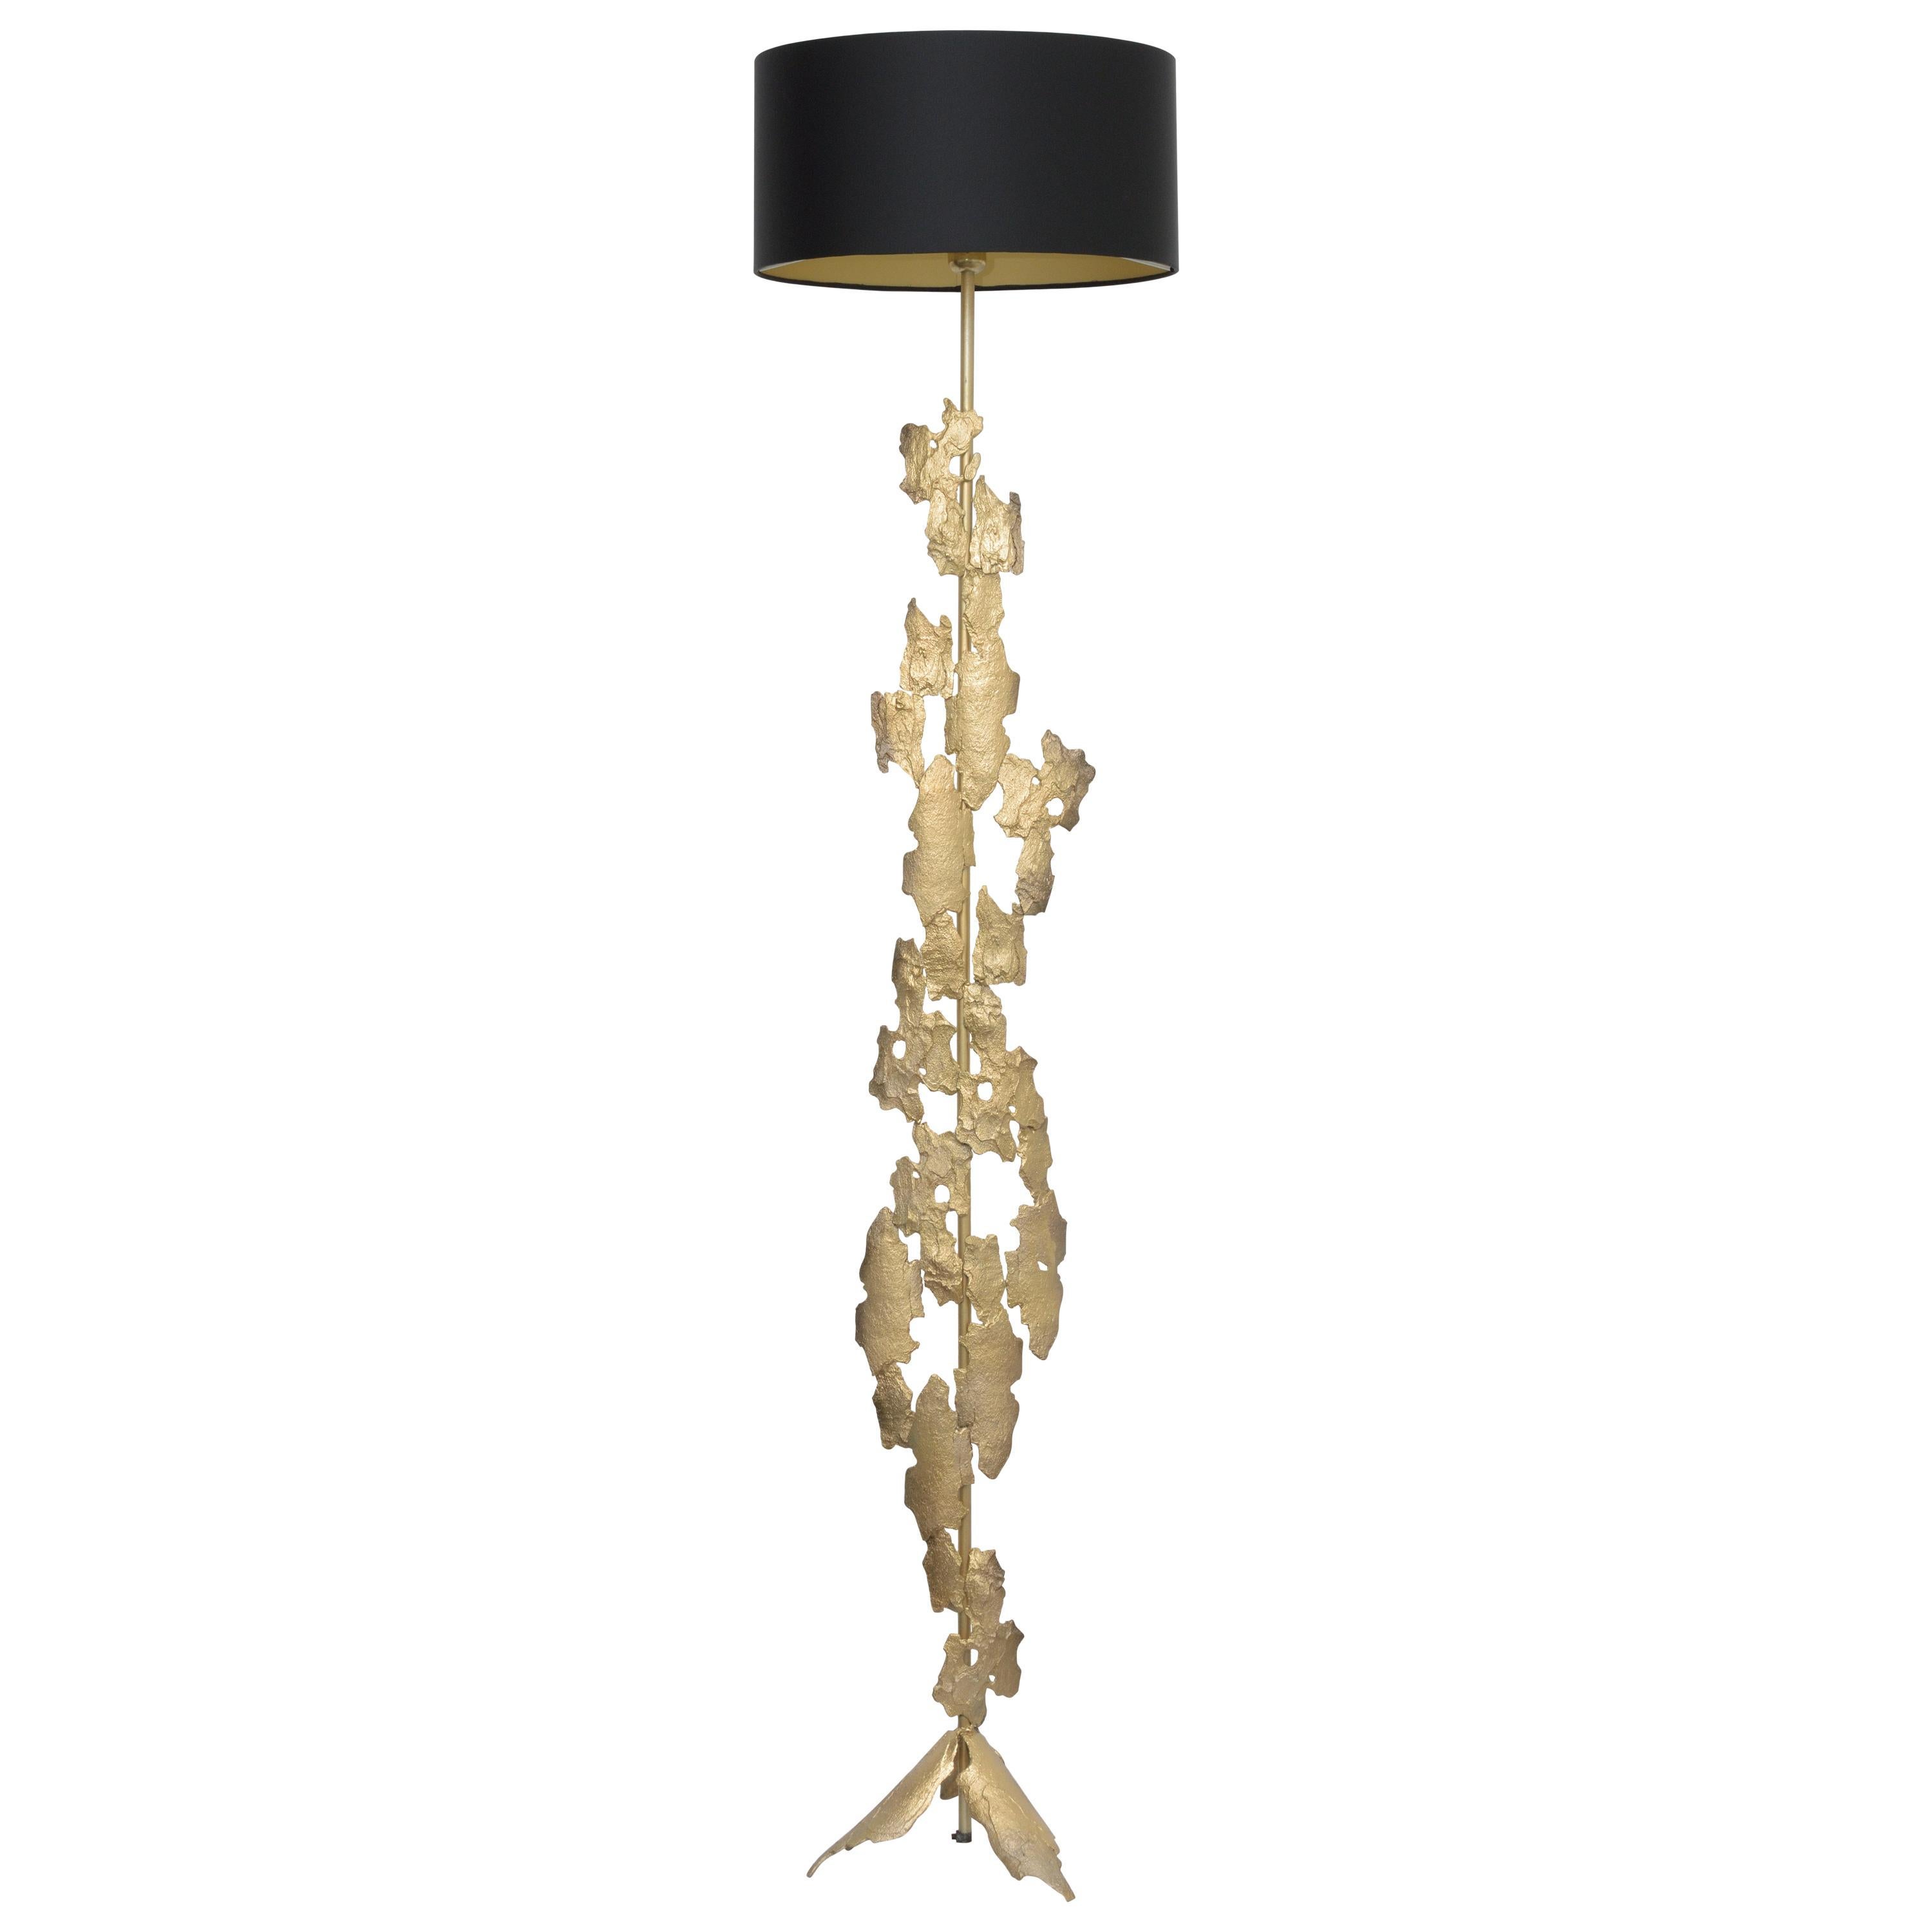  Floor Lamp 'Bark'  - hand crafted and cast in Bronze 